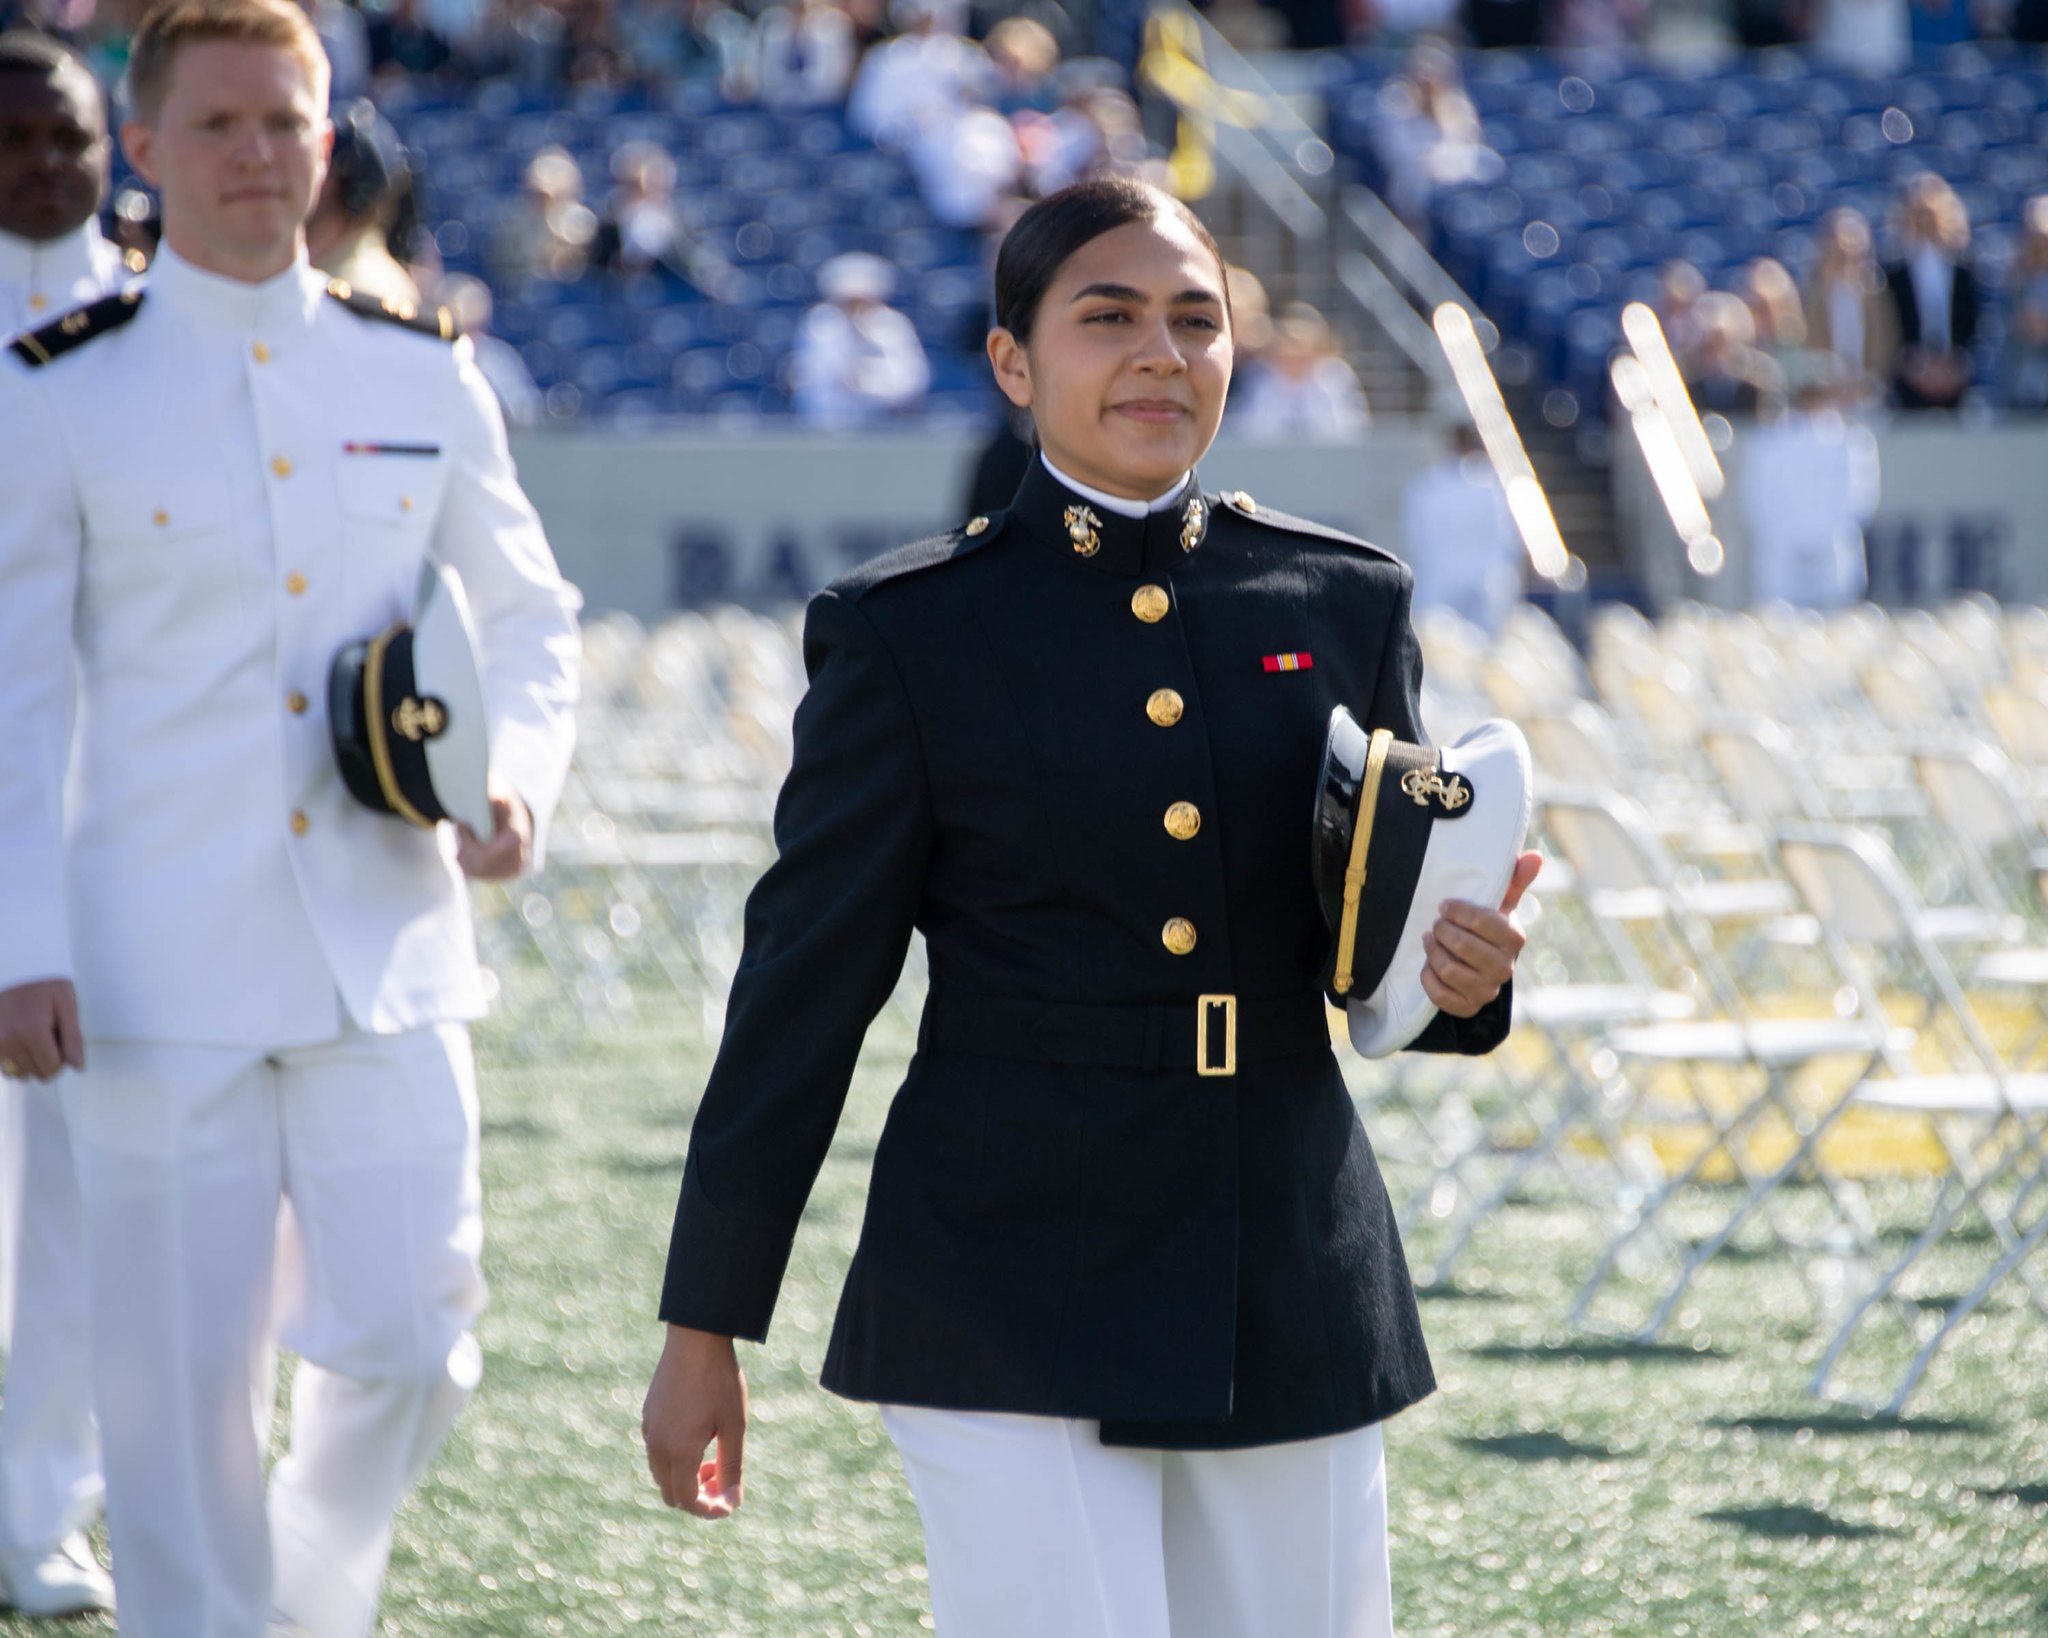 Forging Leaders: The Path to Becoming a Marine Corps Officer Through the Naval Academy